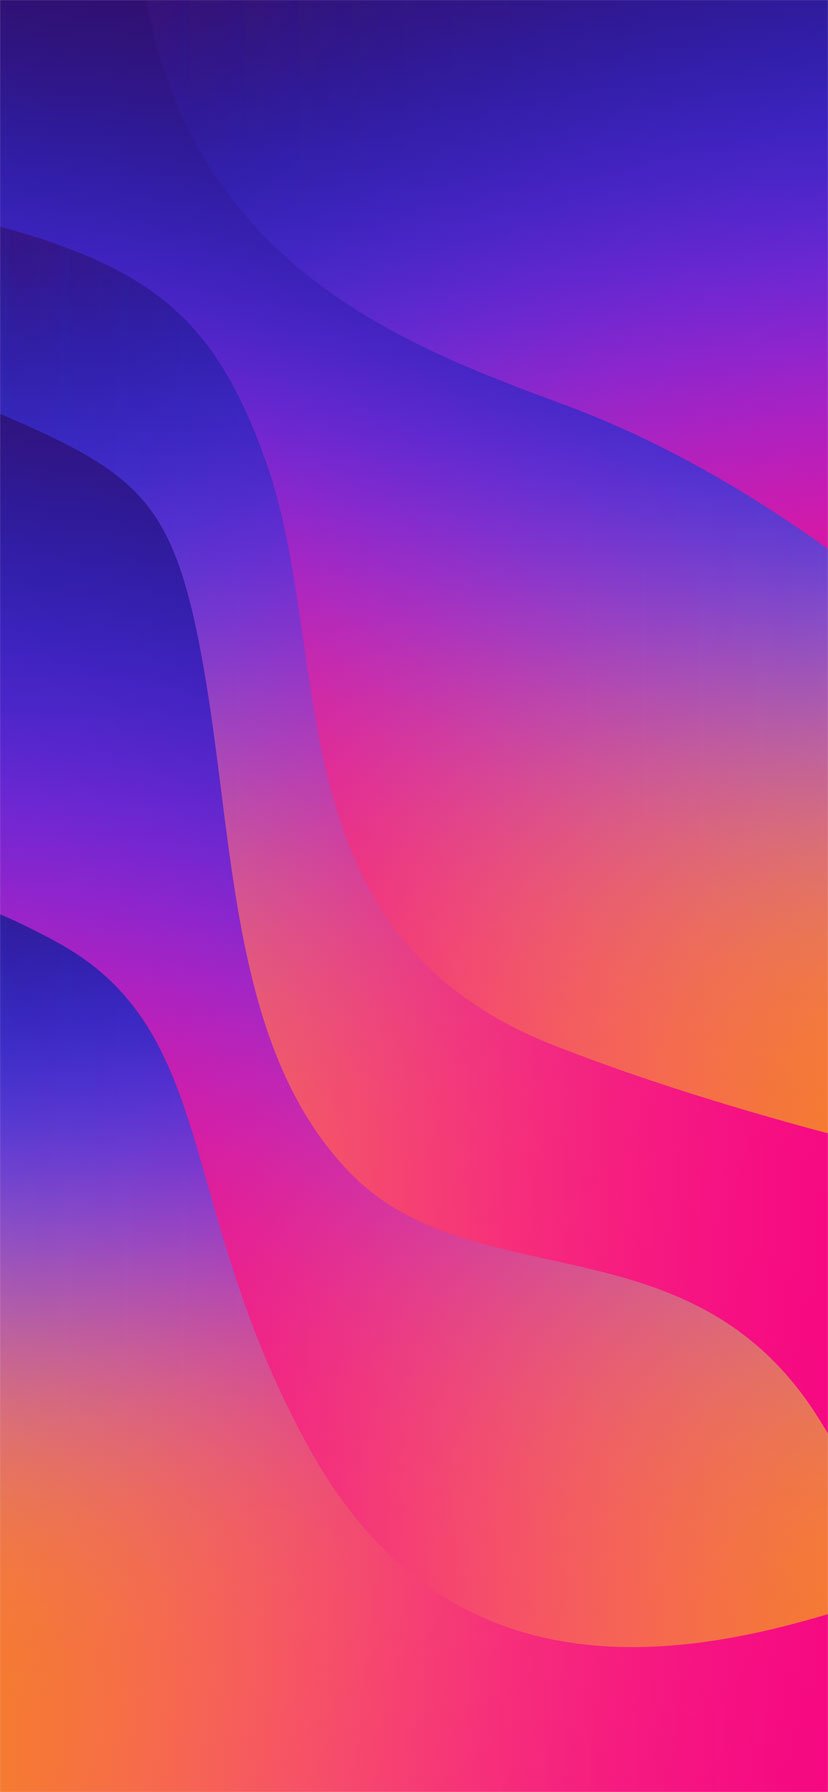 60+ Latest High Quality iPhone 11 Wallpapers & Backgrounds for Everyone